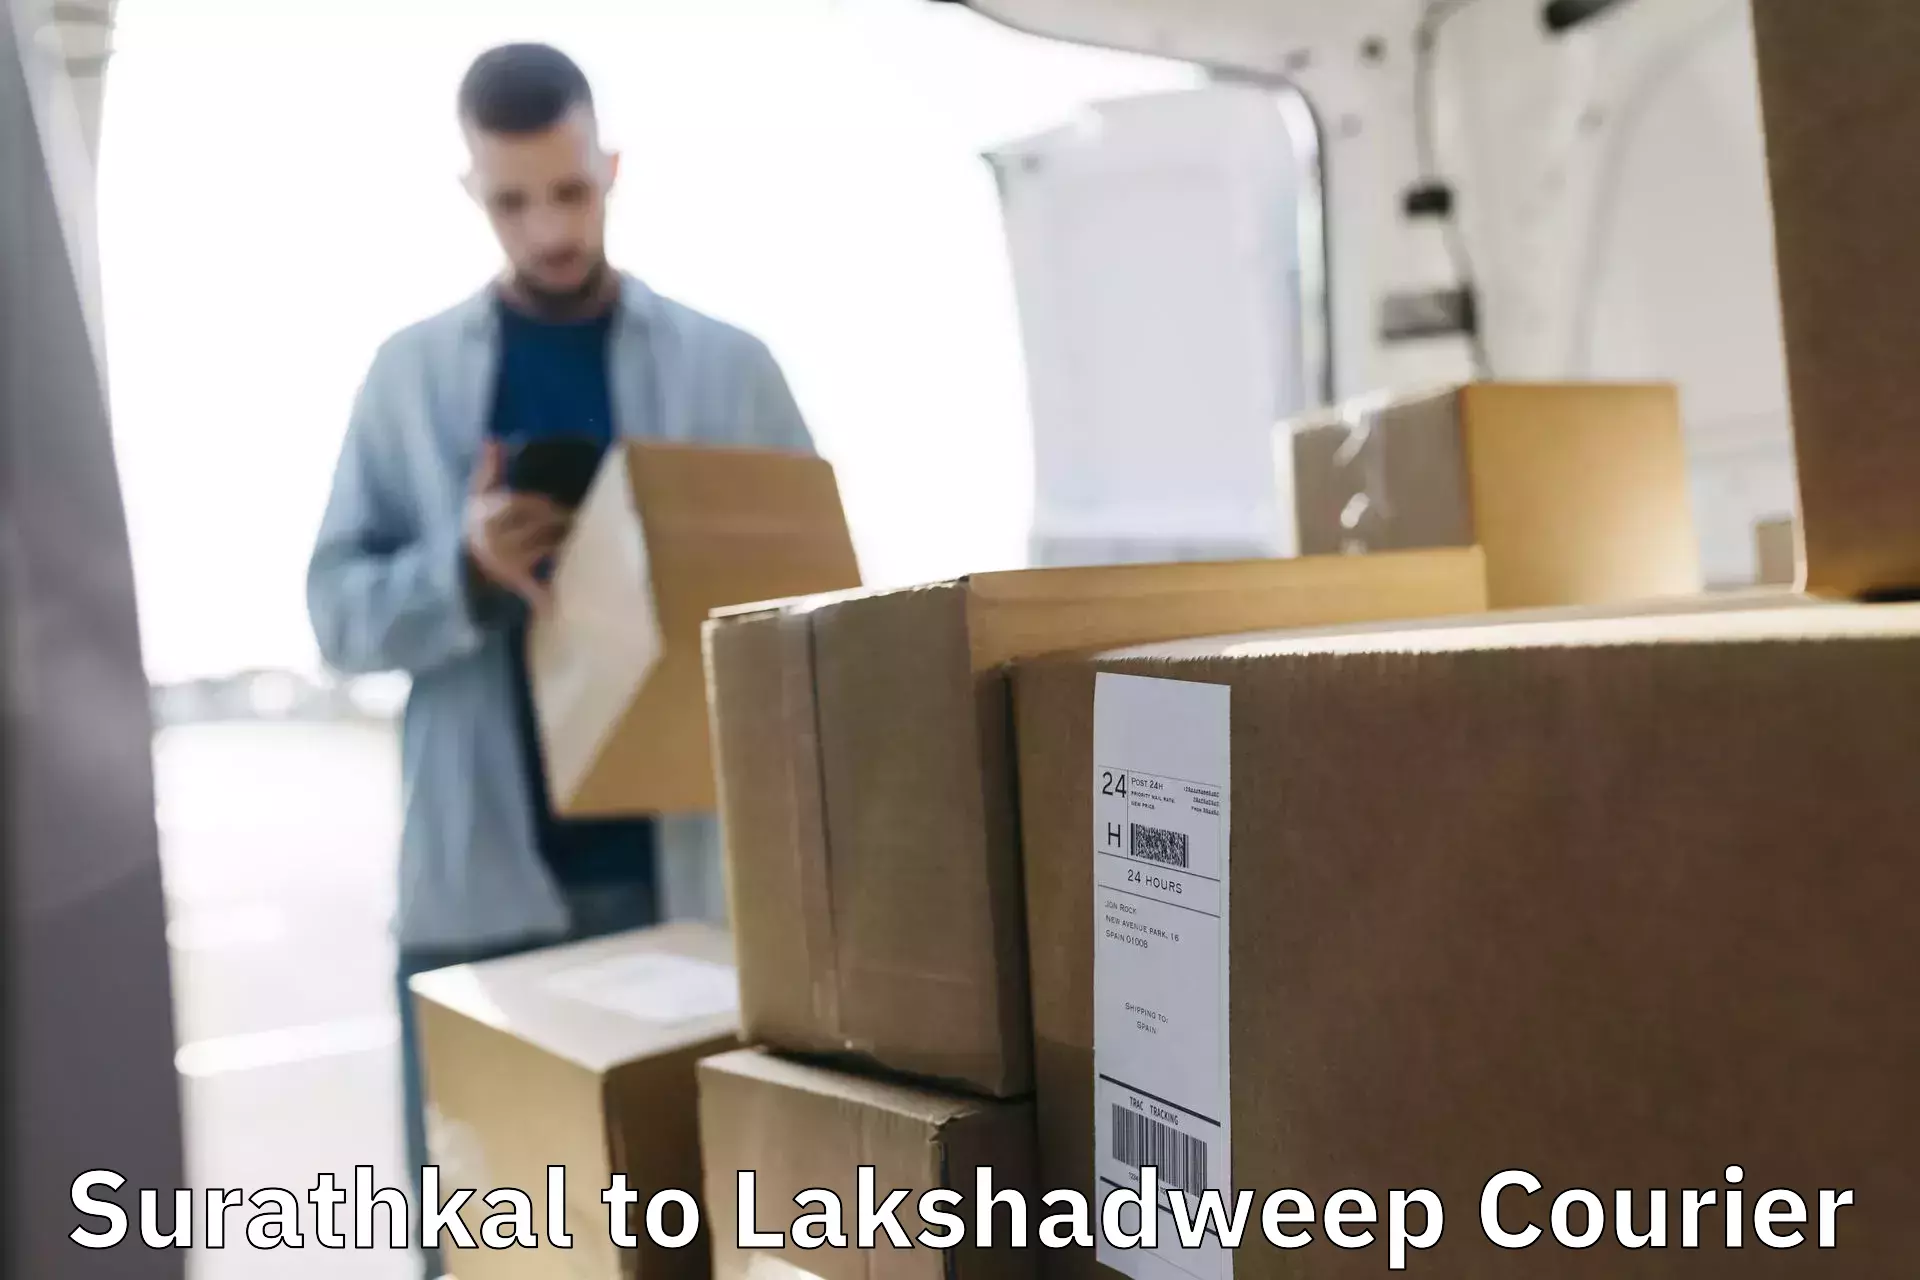 Express postal services Surathkal to Lakshadweep